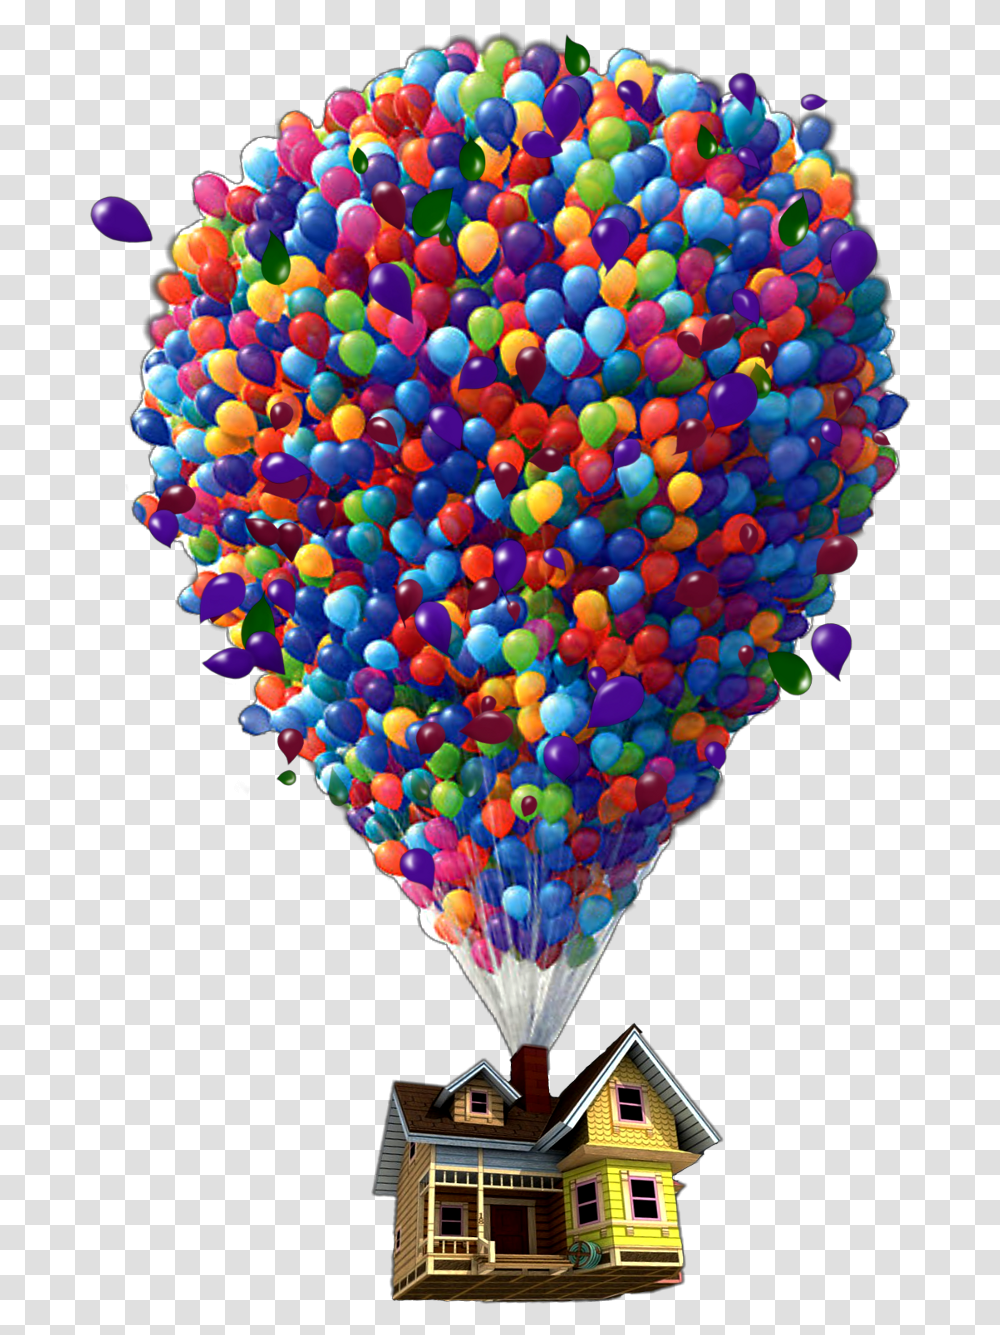 Download Balloon Youtube Up Monsters Inc Pixar Hq Up House Transparent Png